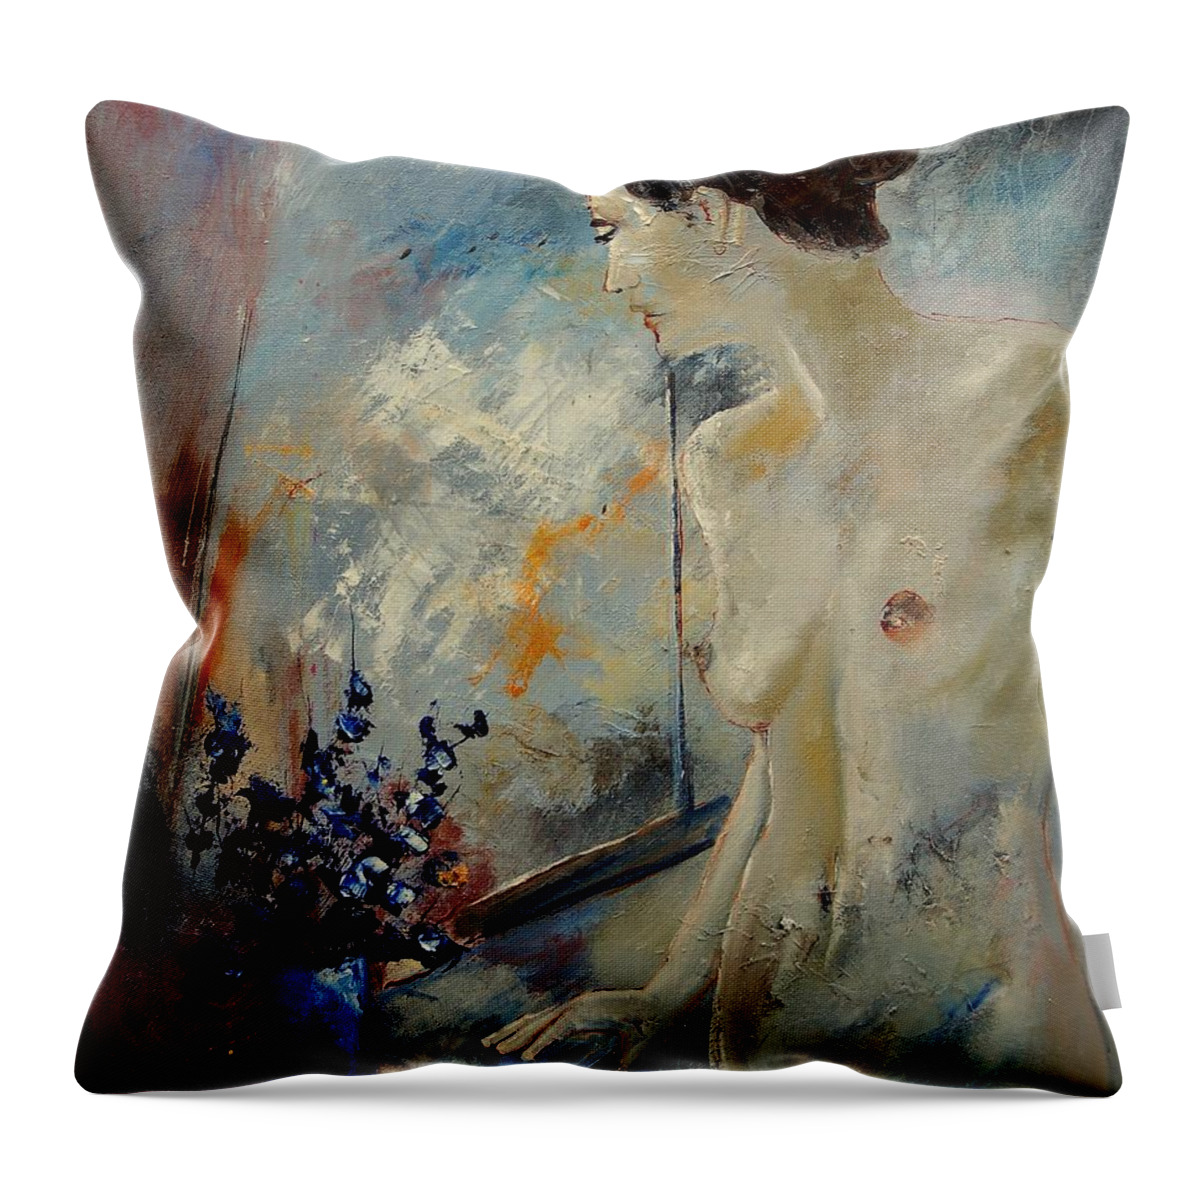 Girl Throw Pillow featuring the painting Waiting For Her Lover by Pol Ledent